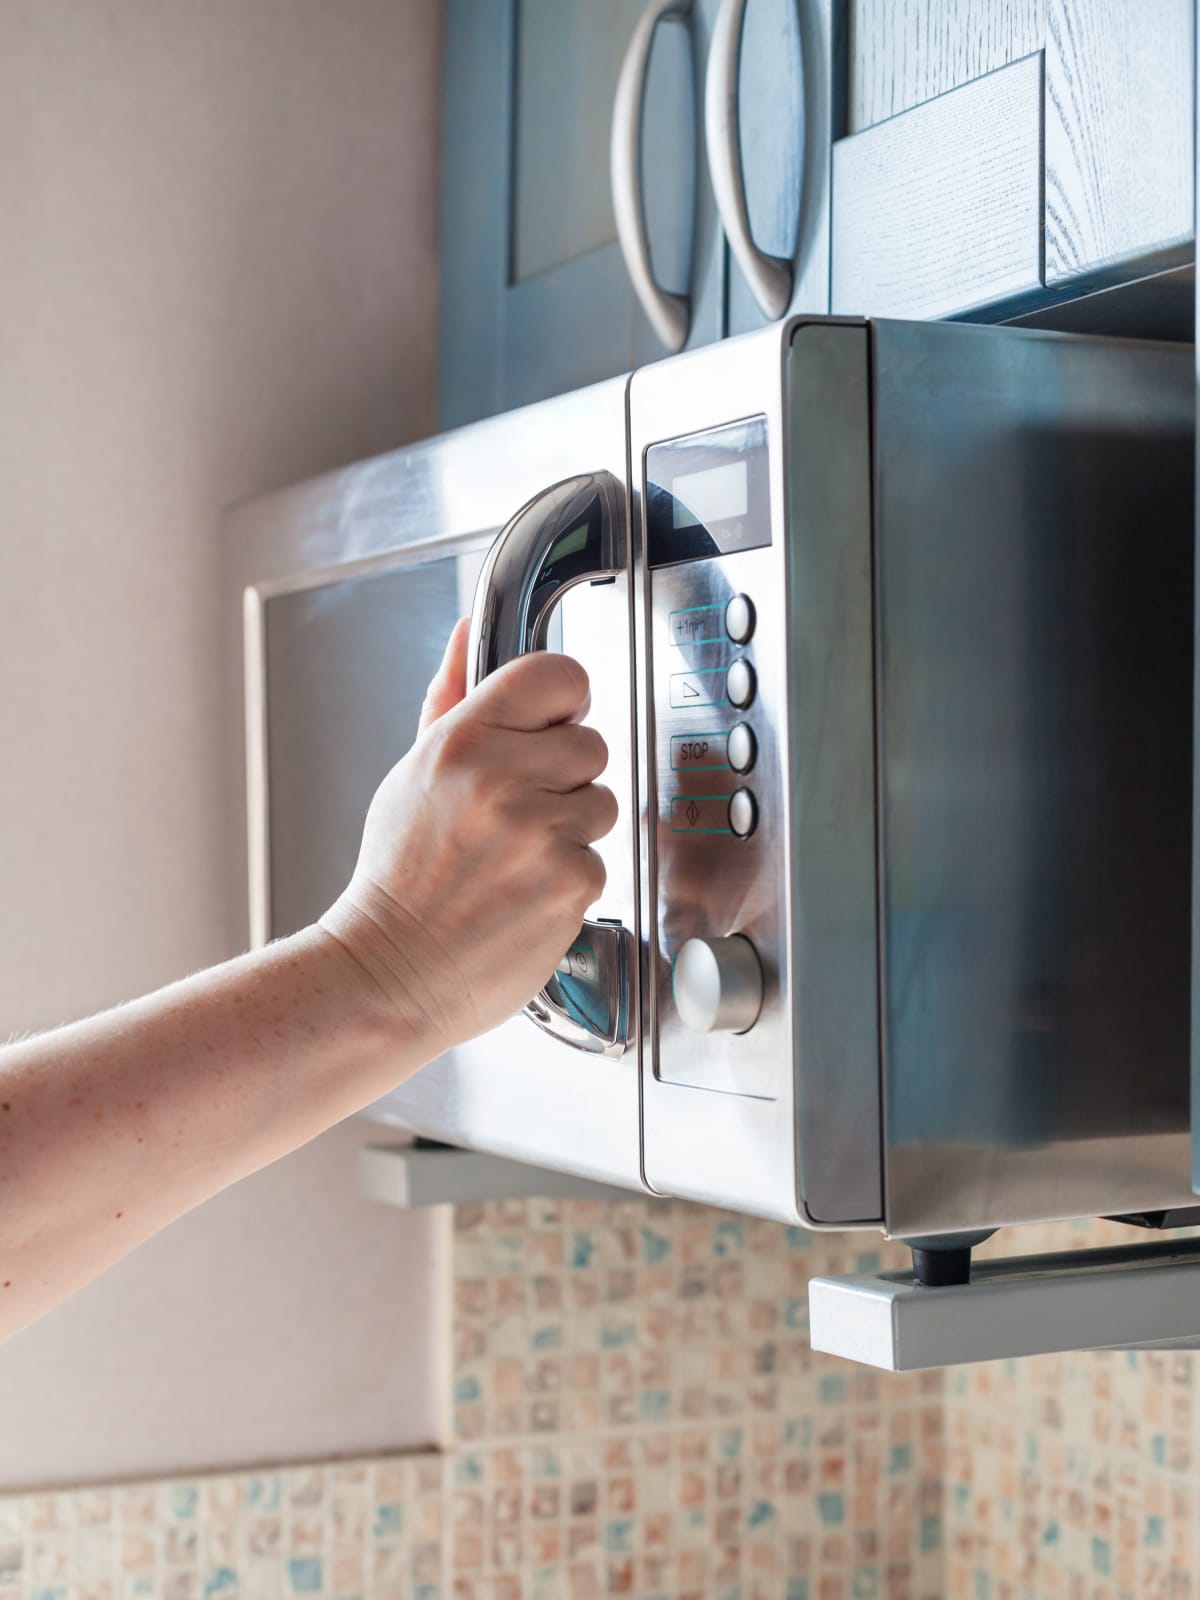 A person's hand gripping the door handle of a microwave